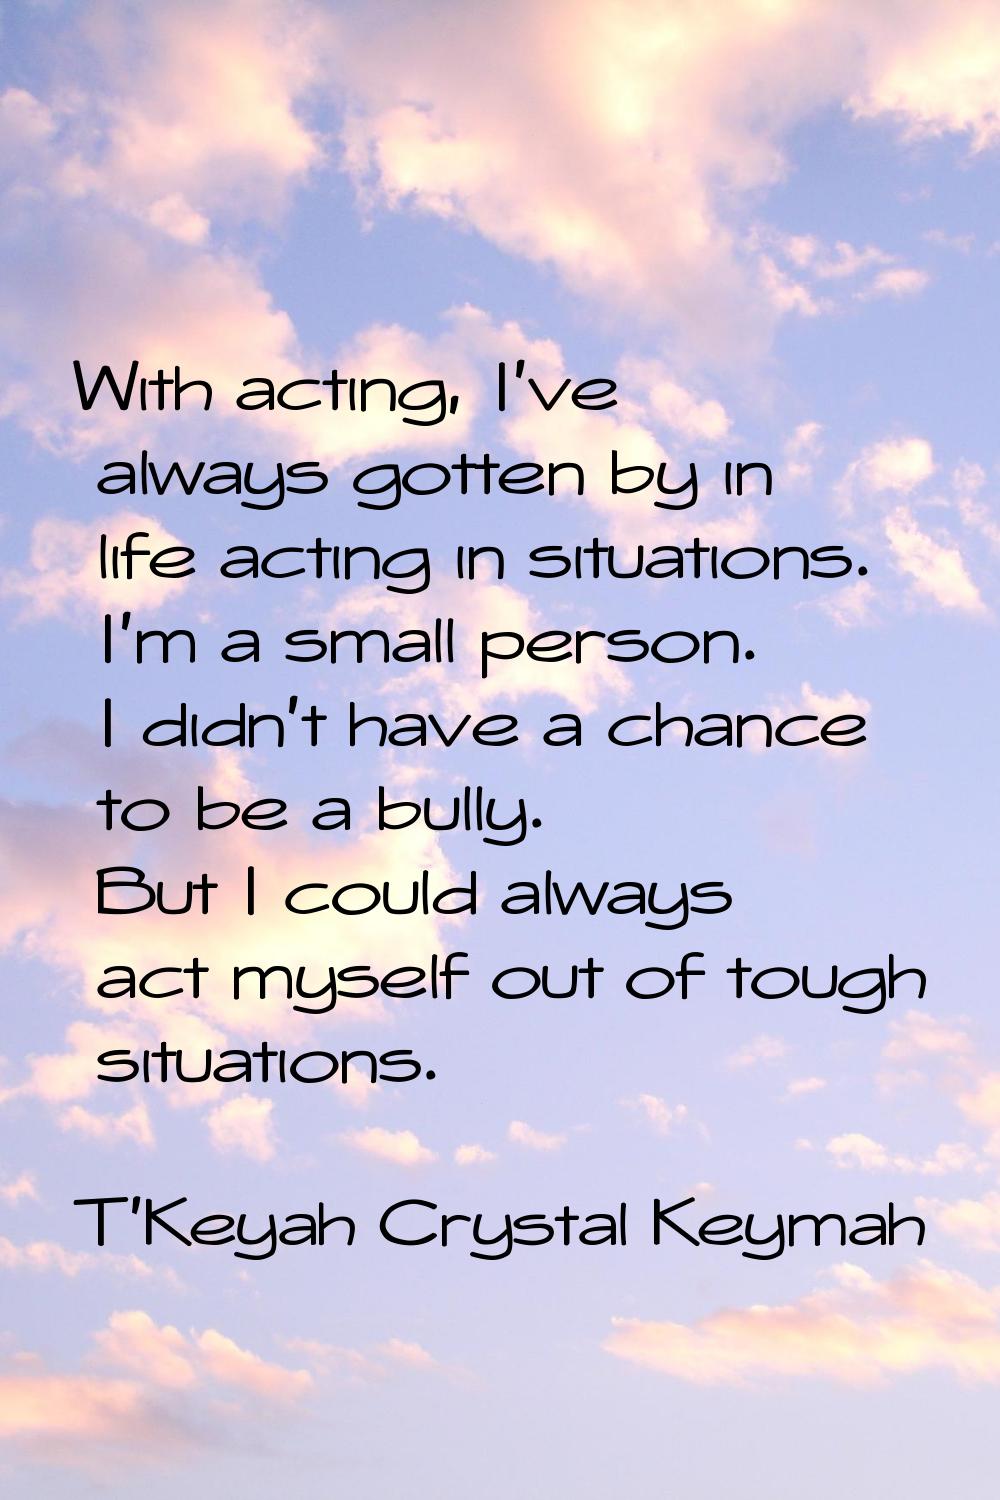 With acting, I've always gotten by in life acting in situations. I'm a small person. I didn't have 